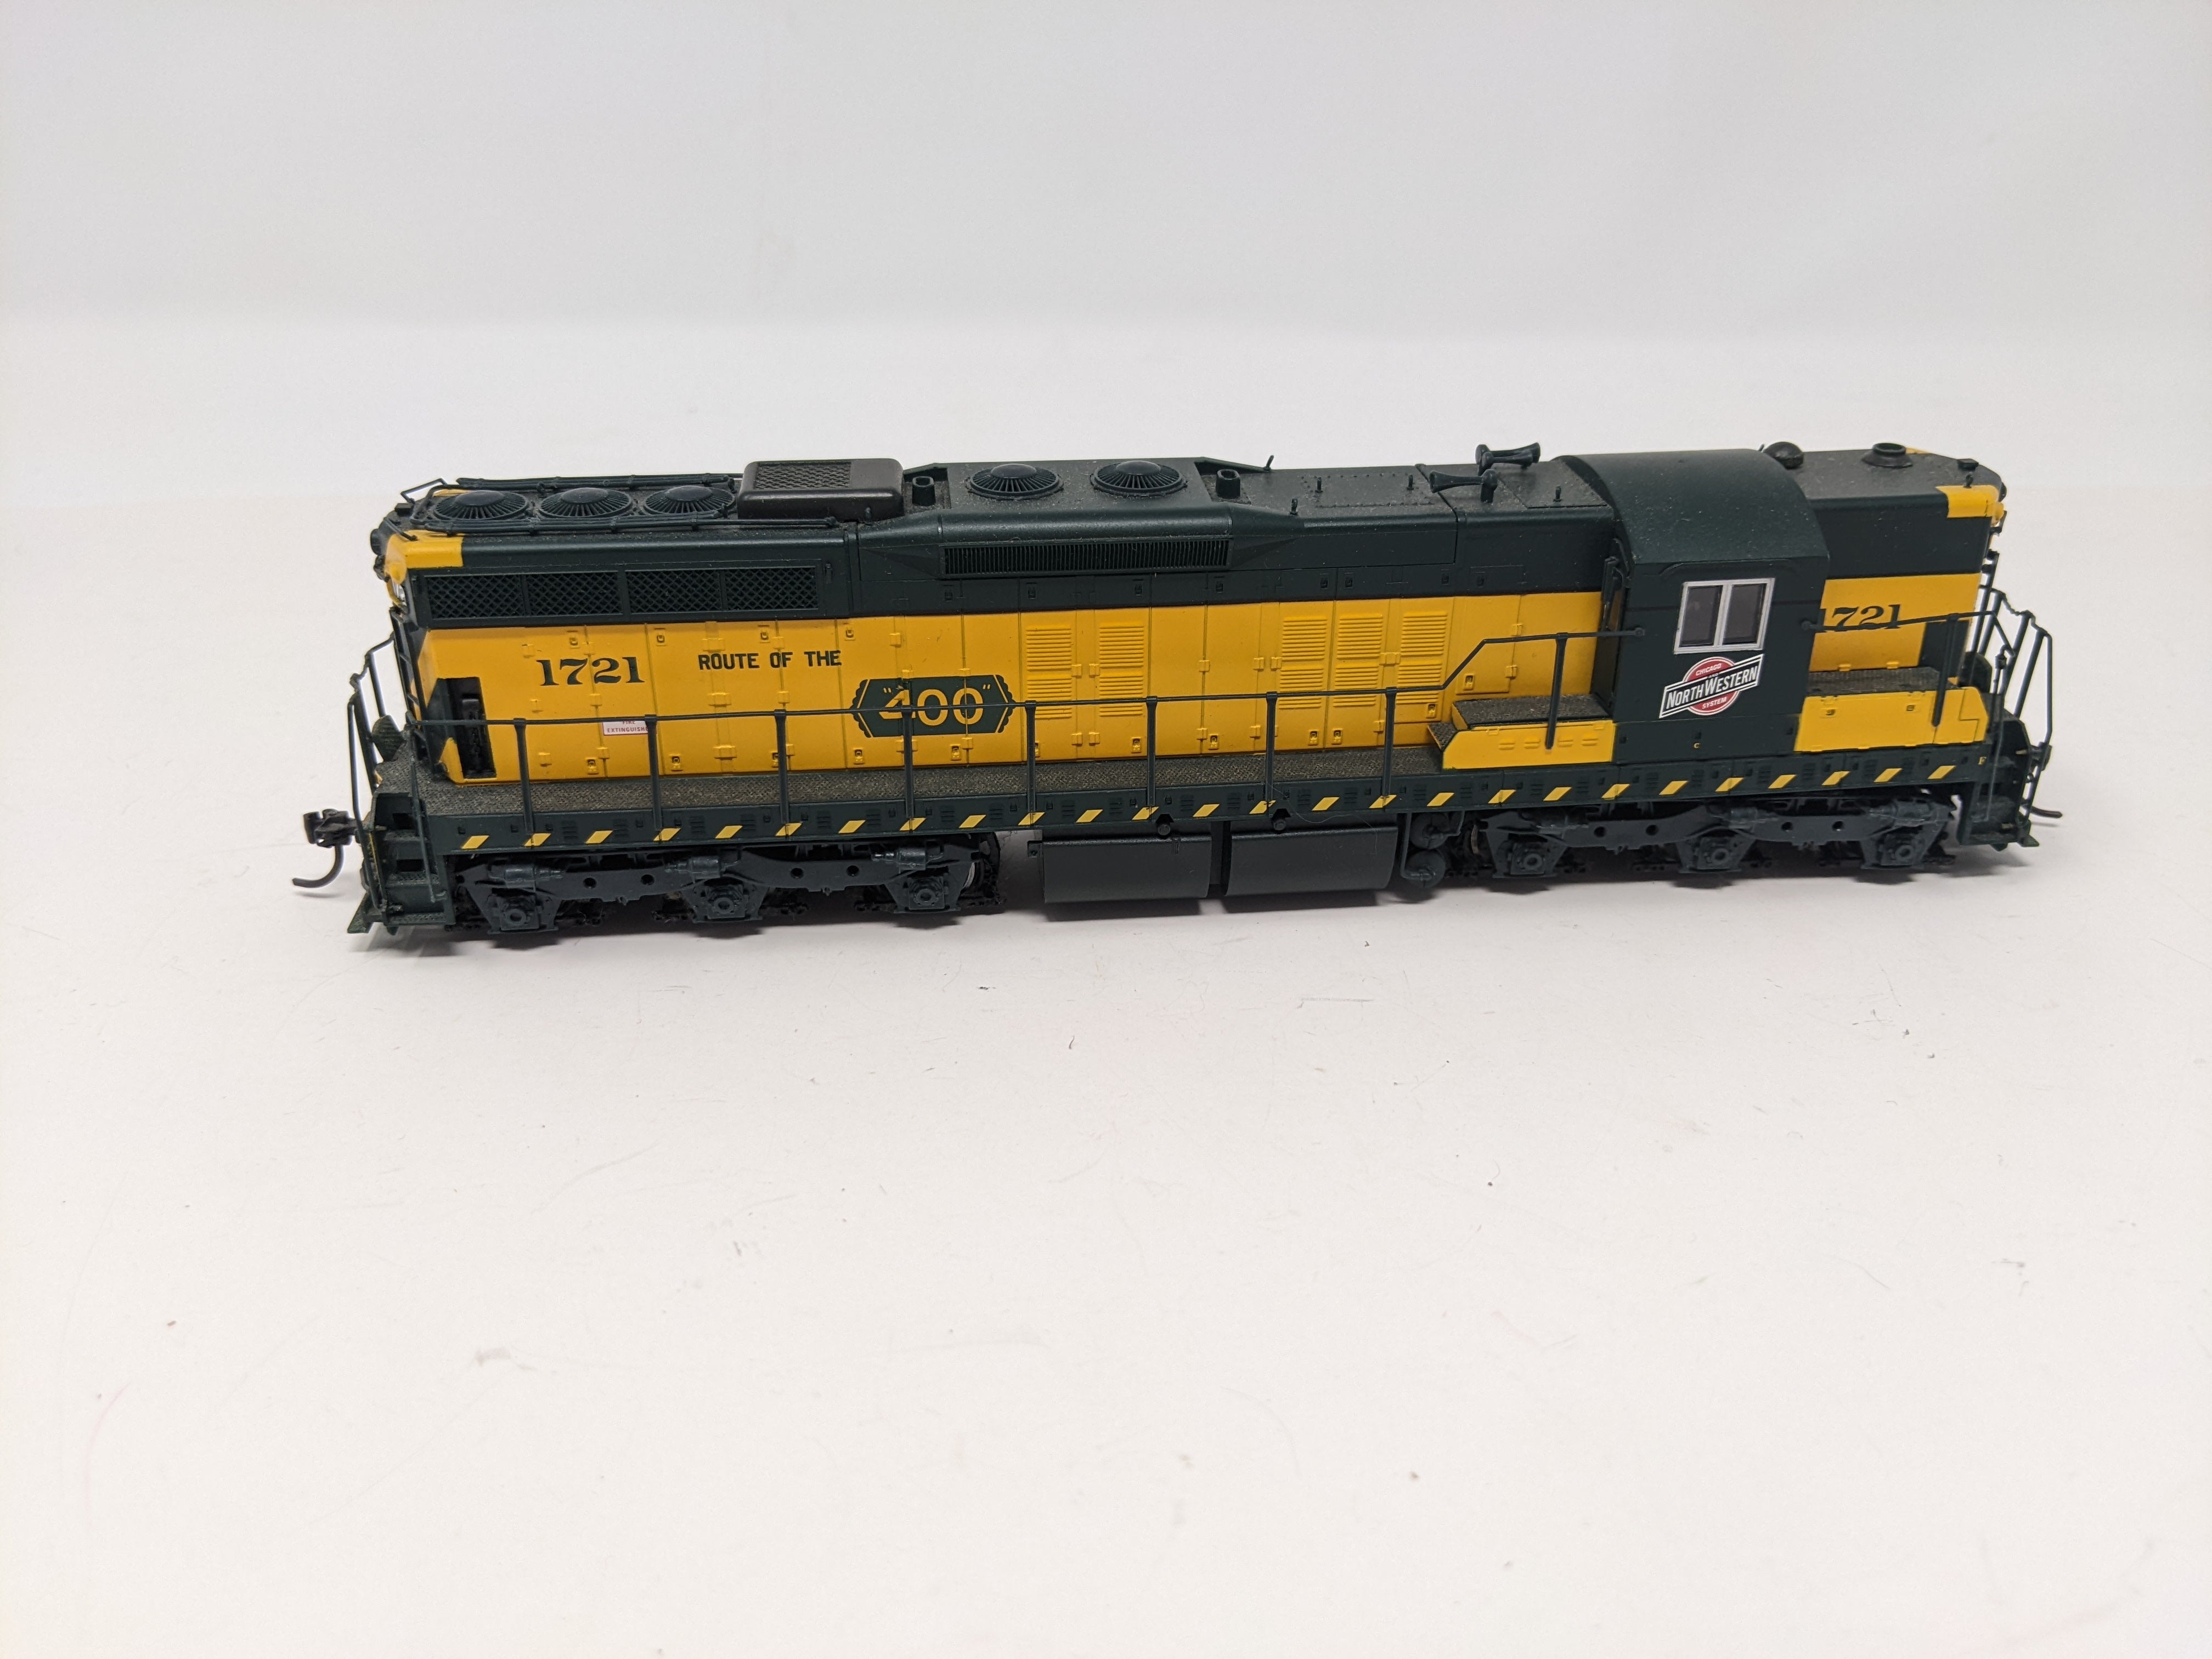 USED Life-Like 21168 HO Scale, Proto 2000 SD9 Diesel Locomotive, Chicago & North Western CN&W #1721 (DC)